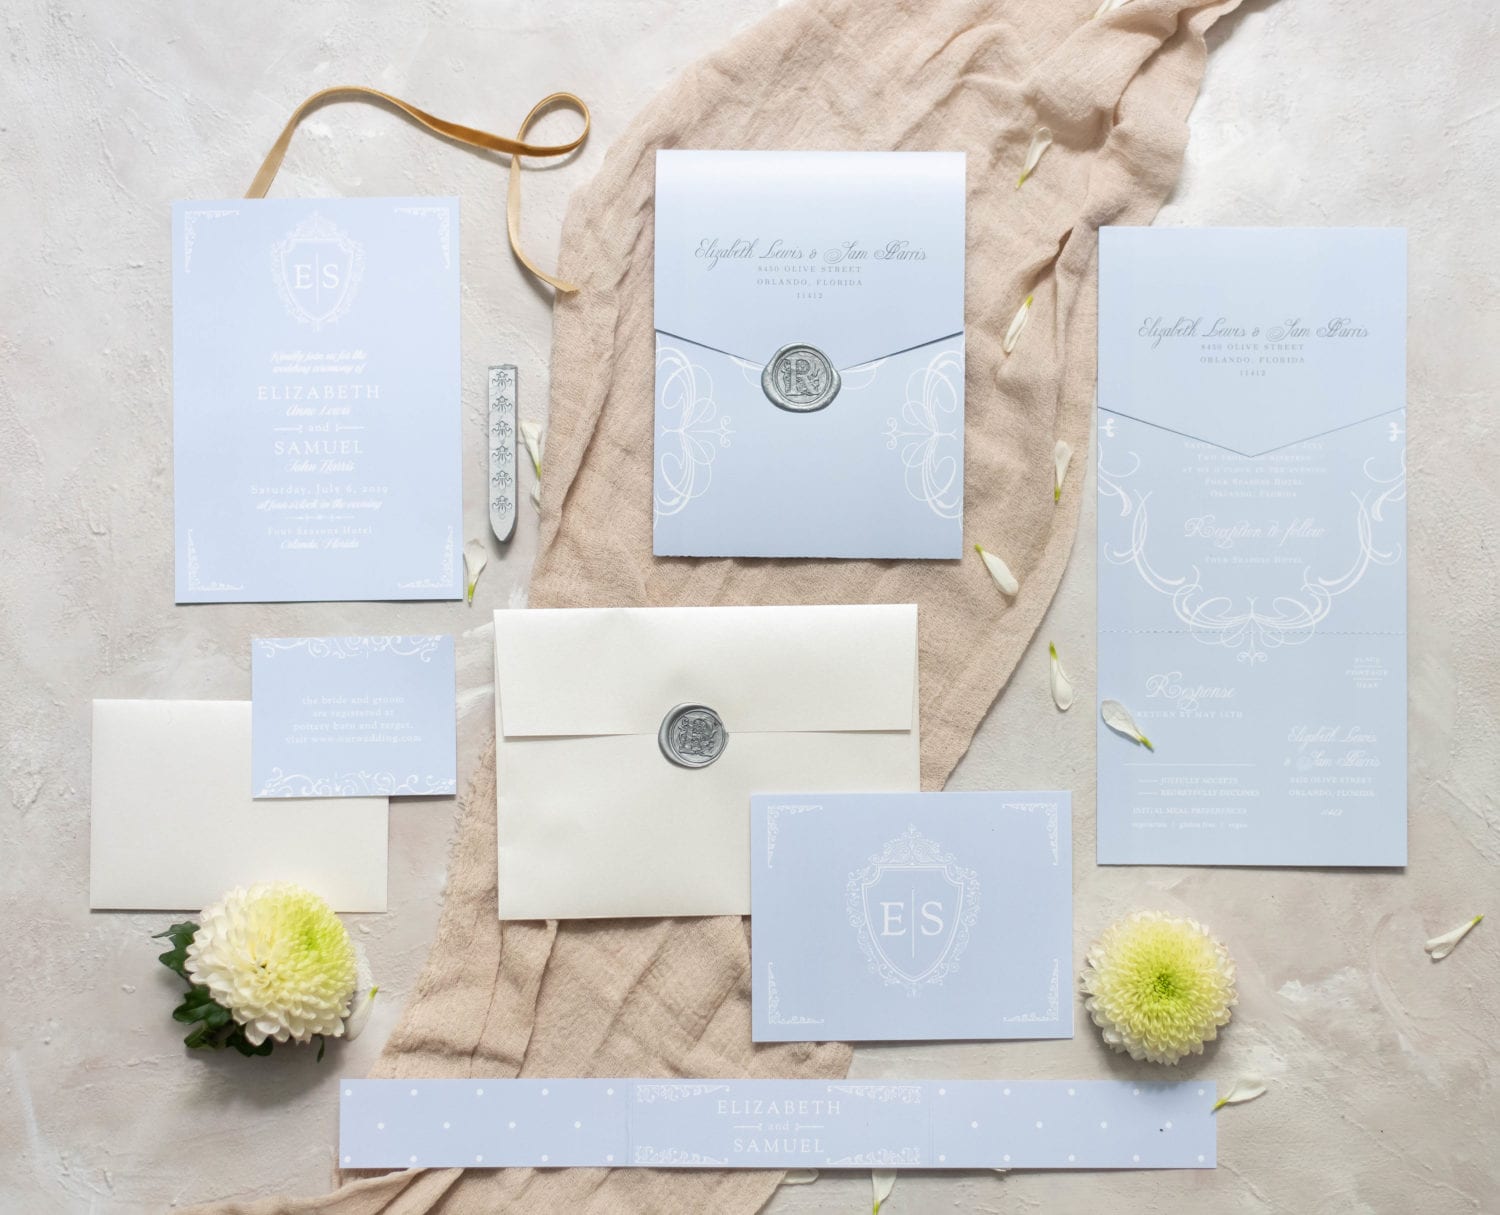 Tampa Beach Bridal Shower Basic Invite Bridal Shower Beach Theme Invitations Light Blue and white with silver wedding invitation suite flat lay